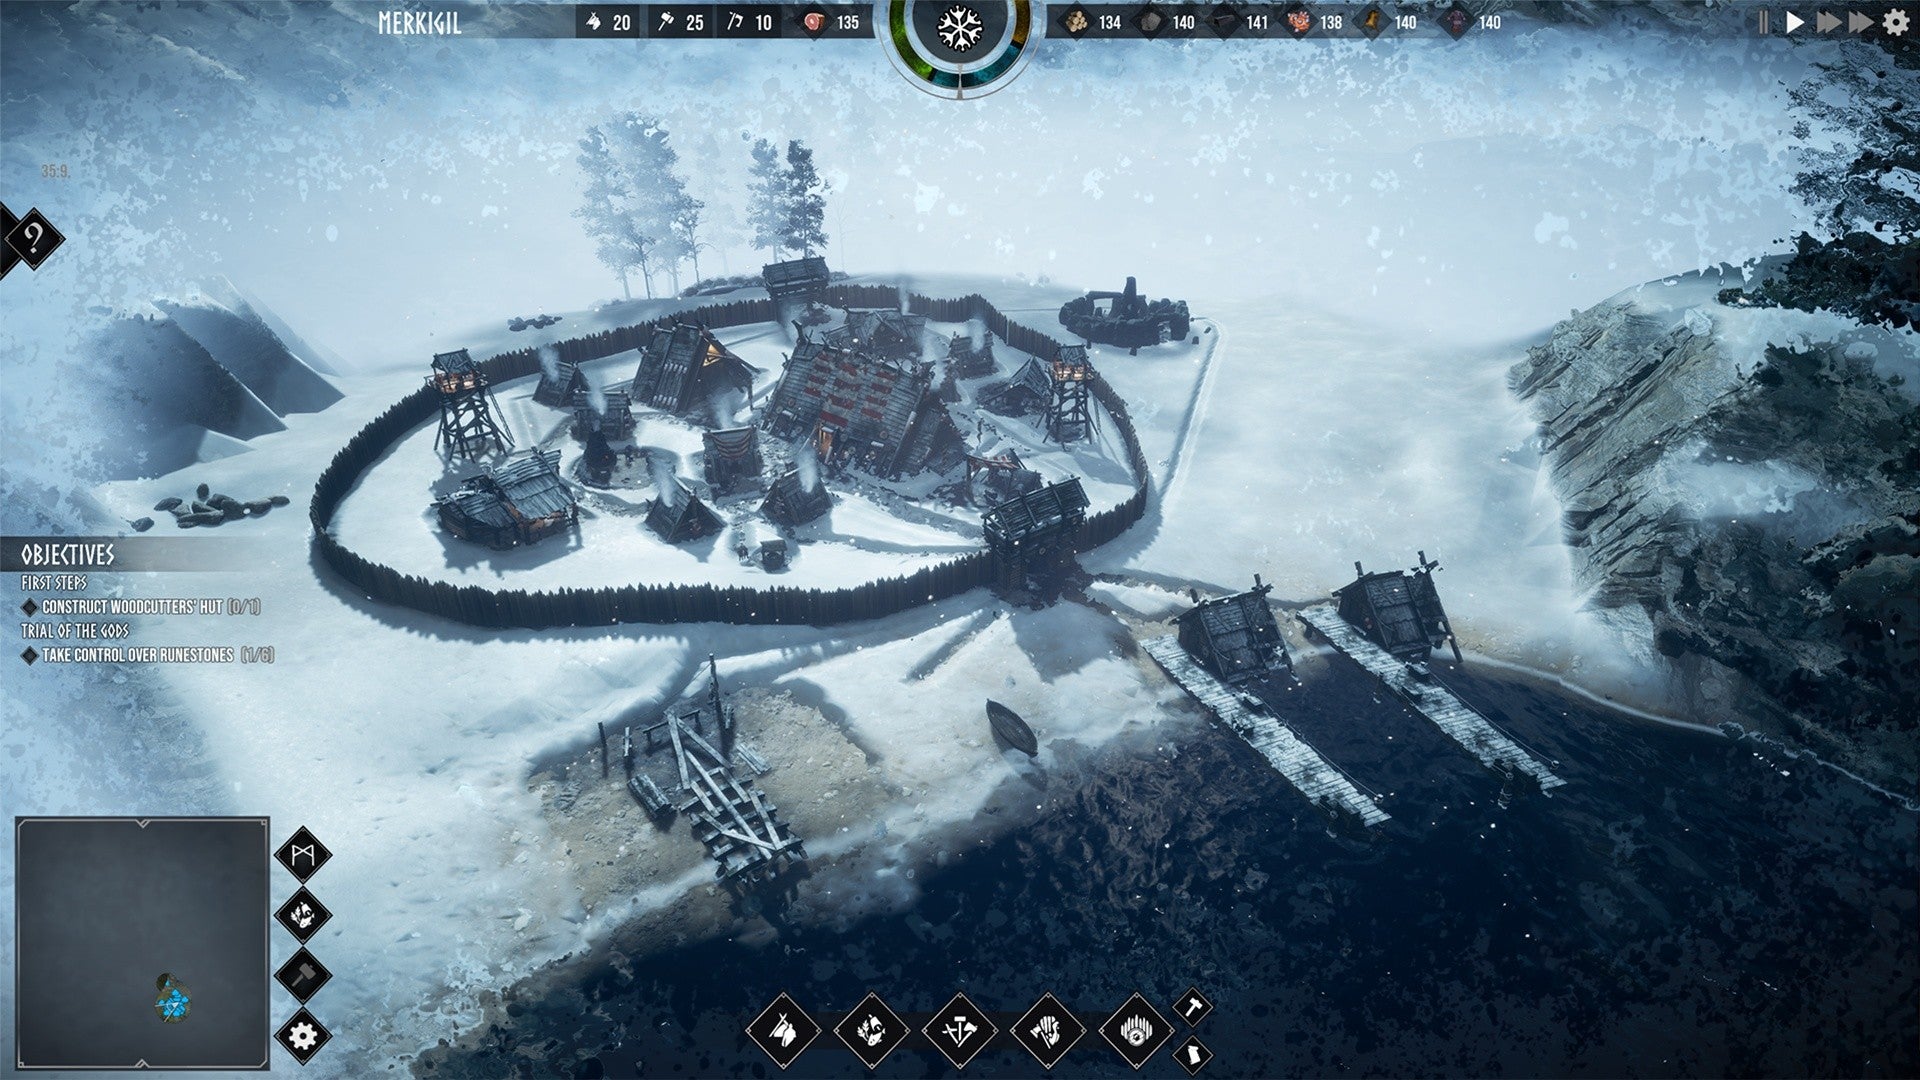 Frozenheim - A small viking settlement is surrounded by walls and snow.